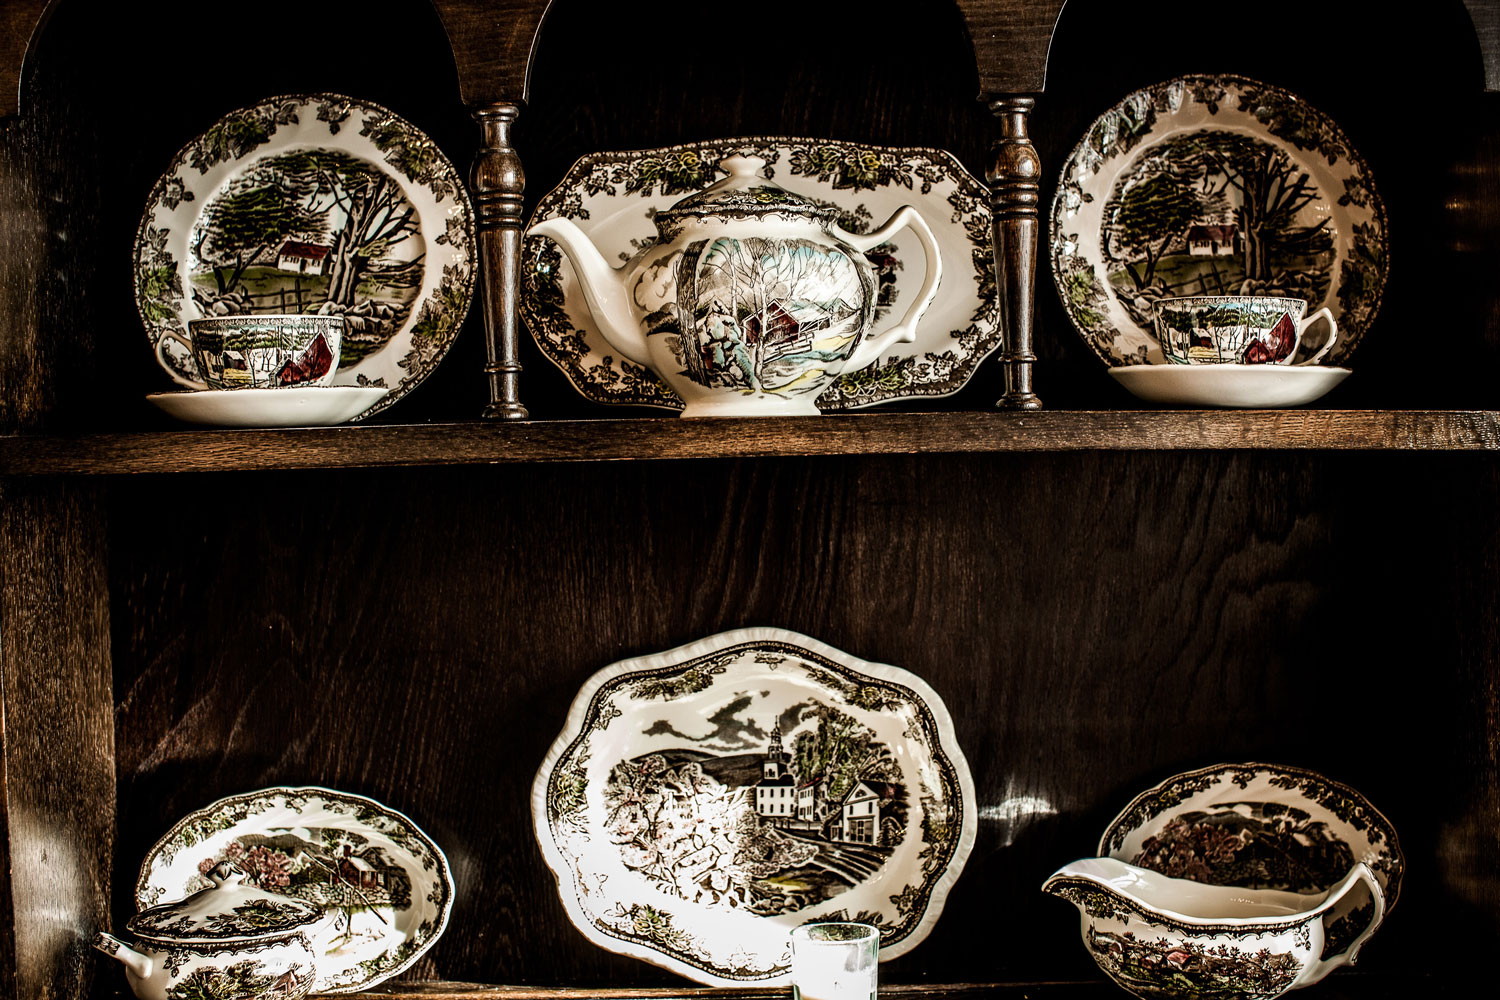  China tableware displayed in an antique wooden China cabinet. 